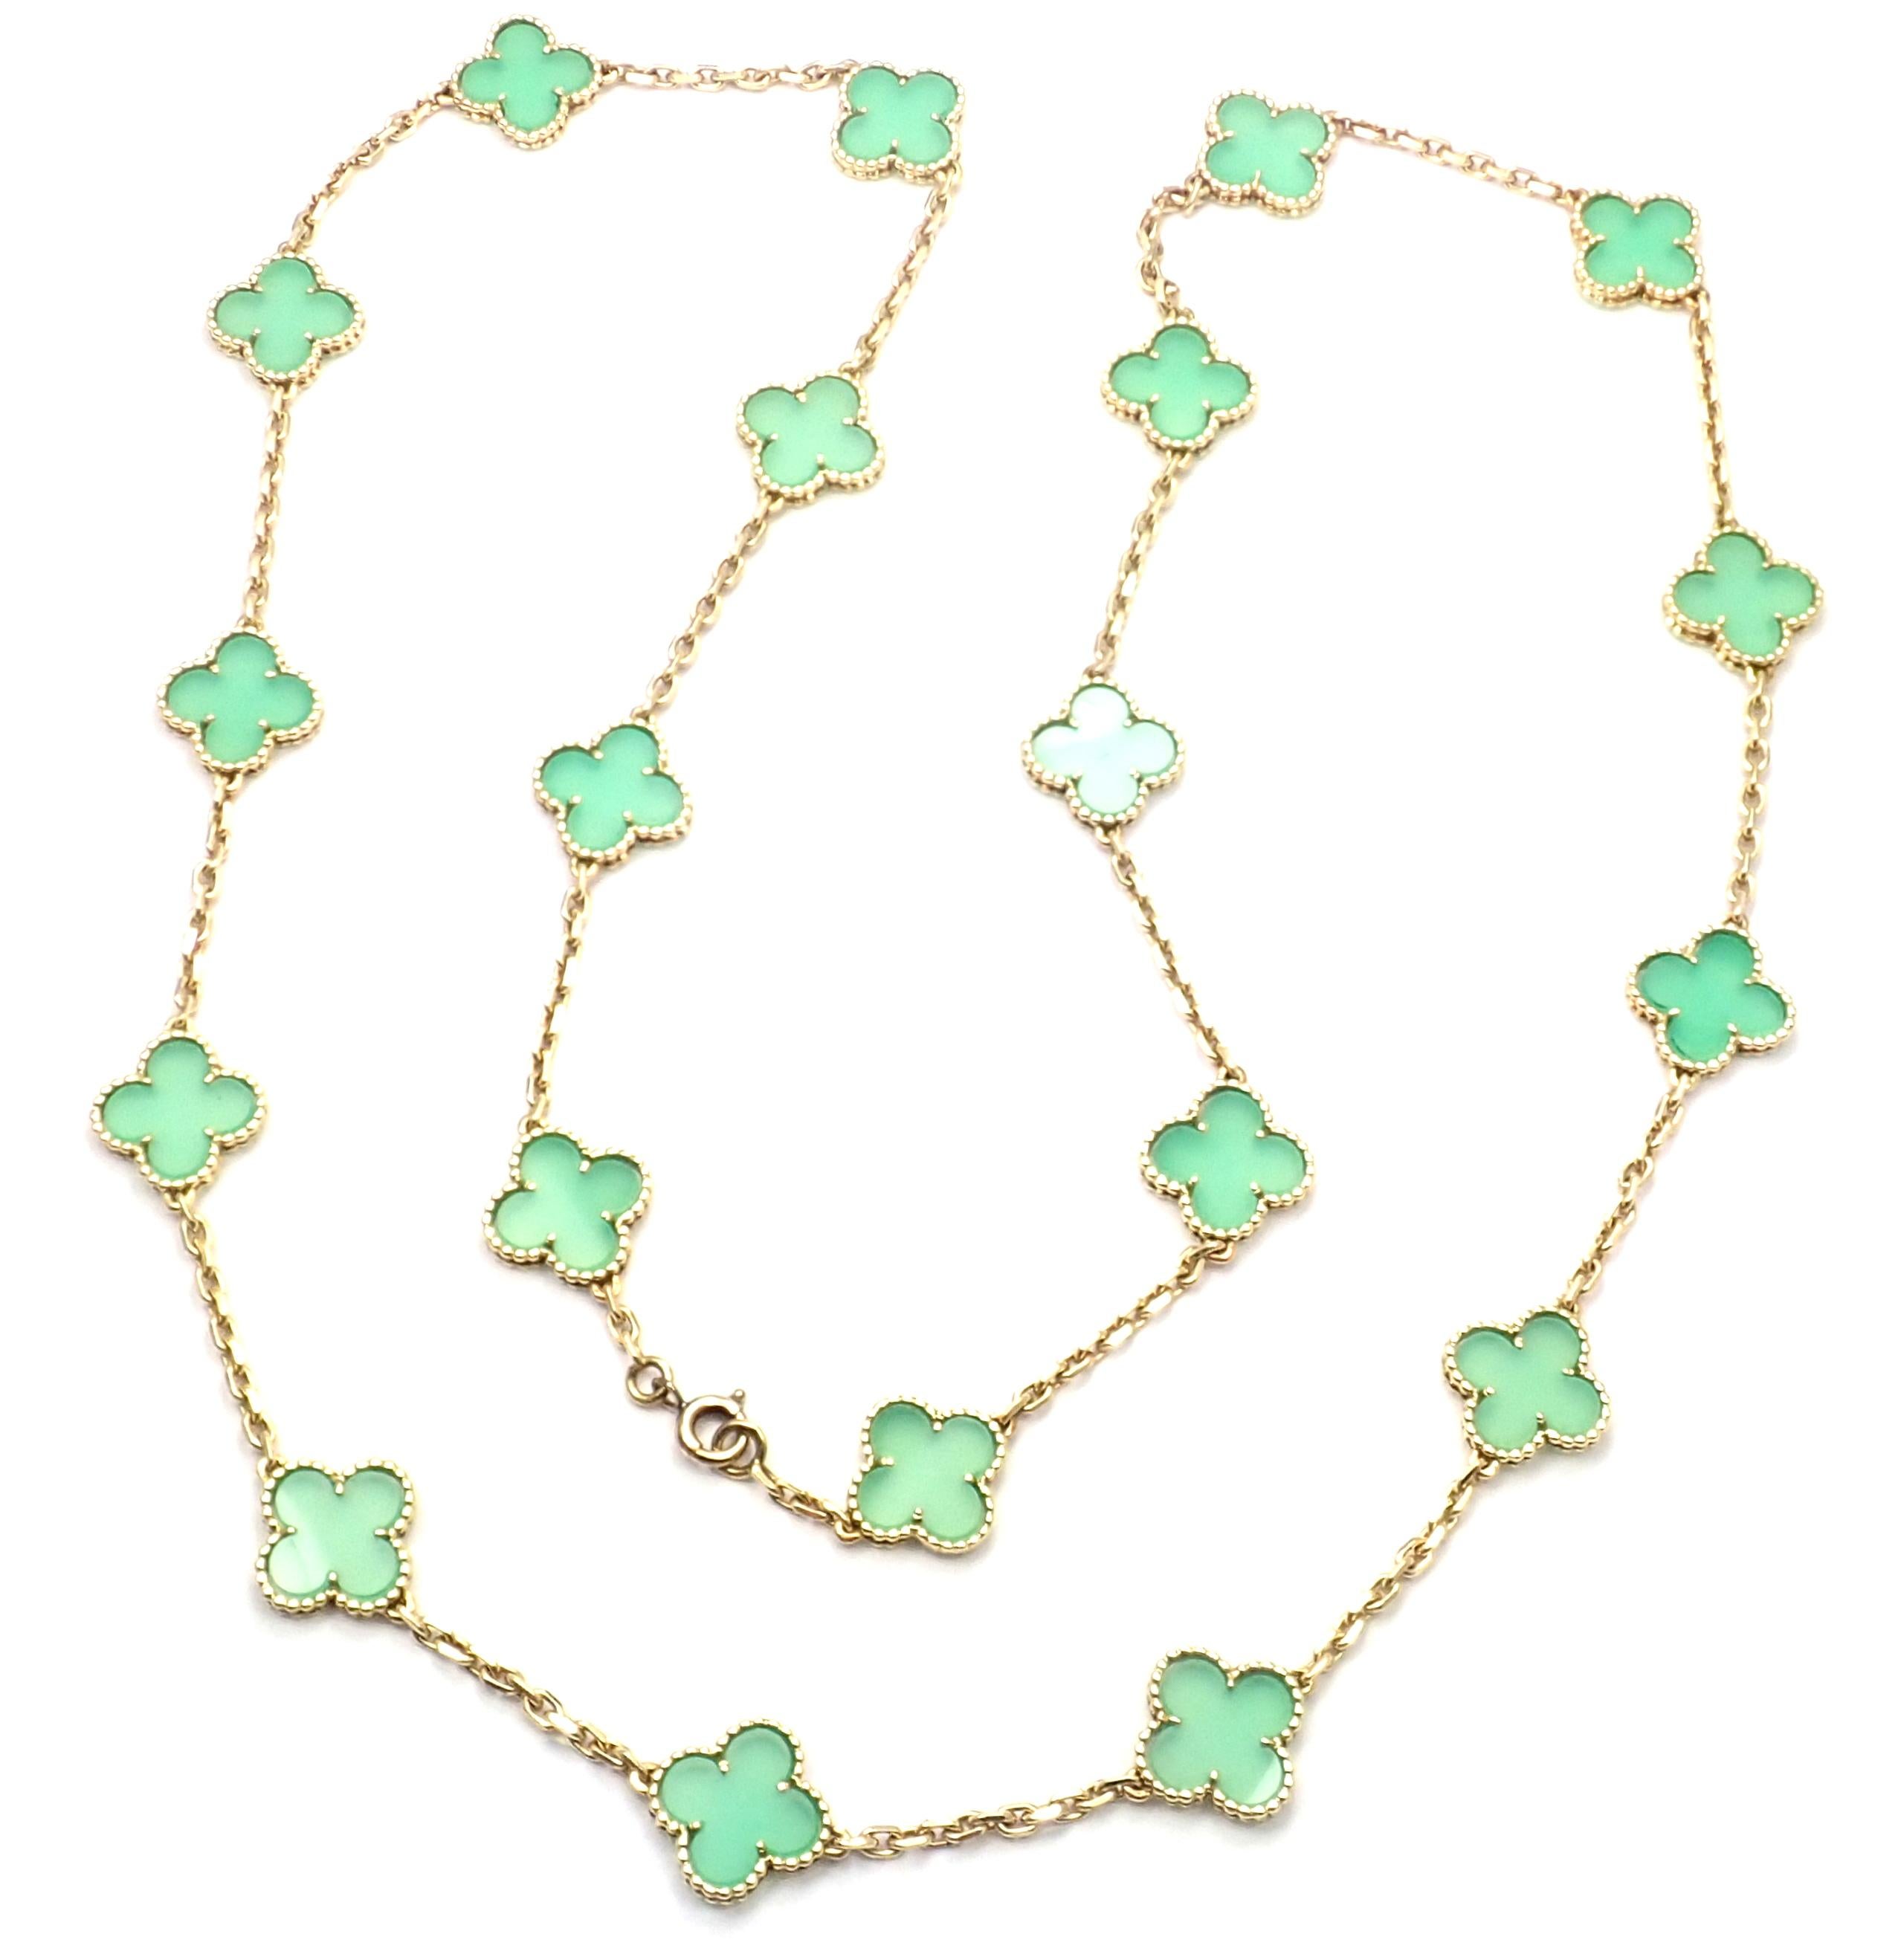 18k Yellow Gold Vintage 20 Alhambra Green Chalcedony Necklace by 
Van Cleef & Arpels.
With 20 motifs of green chalcedony alhambra stones 15mm each
*** This is a rare, very collectible, antique Van Cleef & Arpels Green Chalcedony Vintage Alhambra